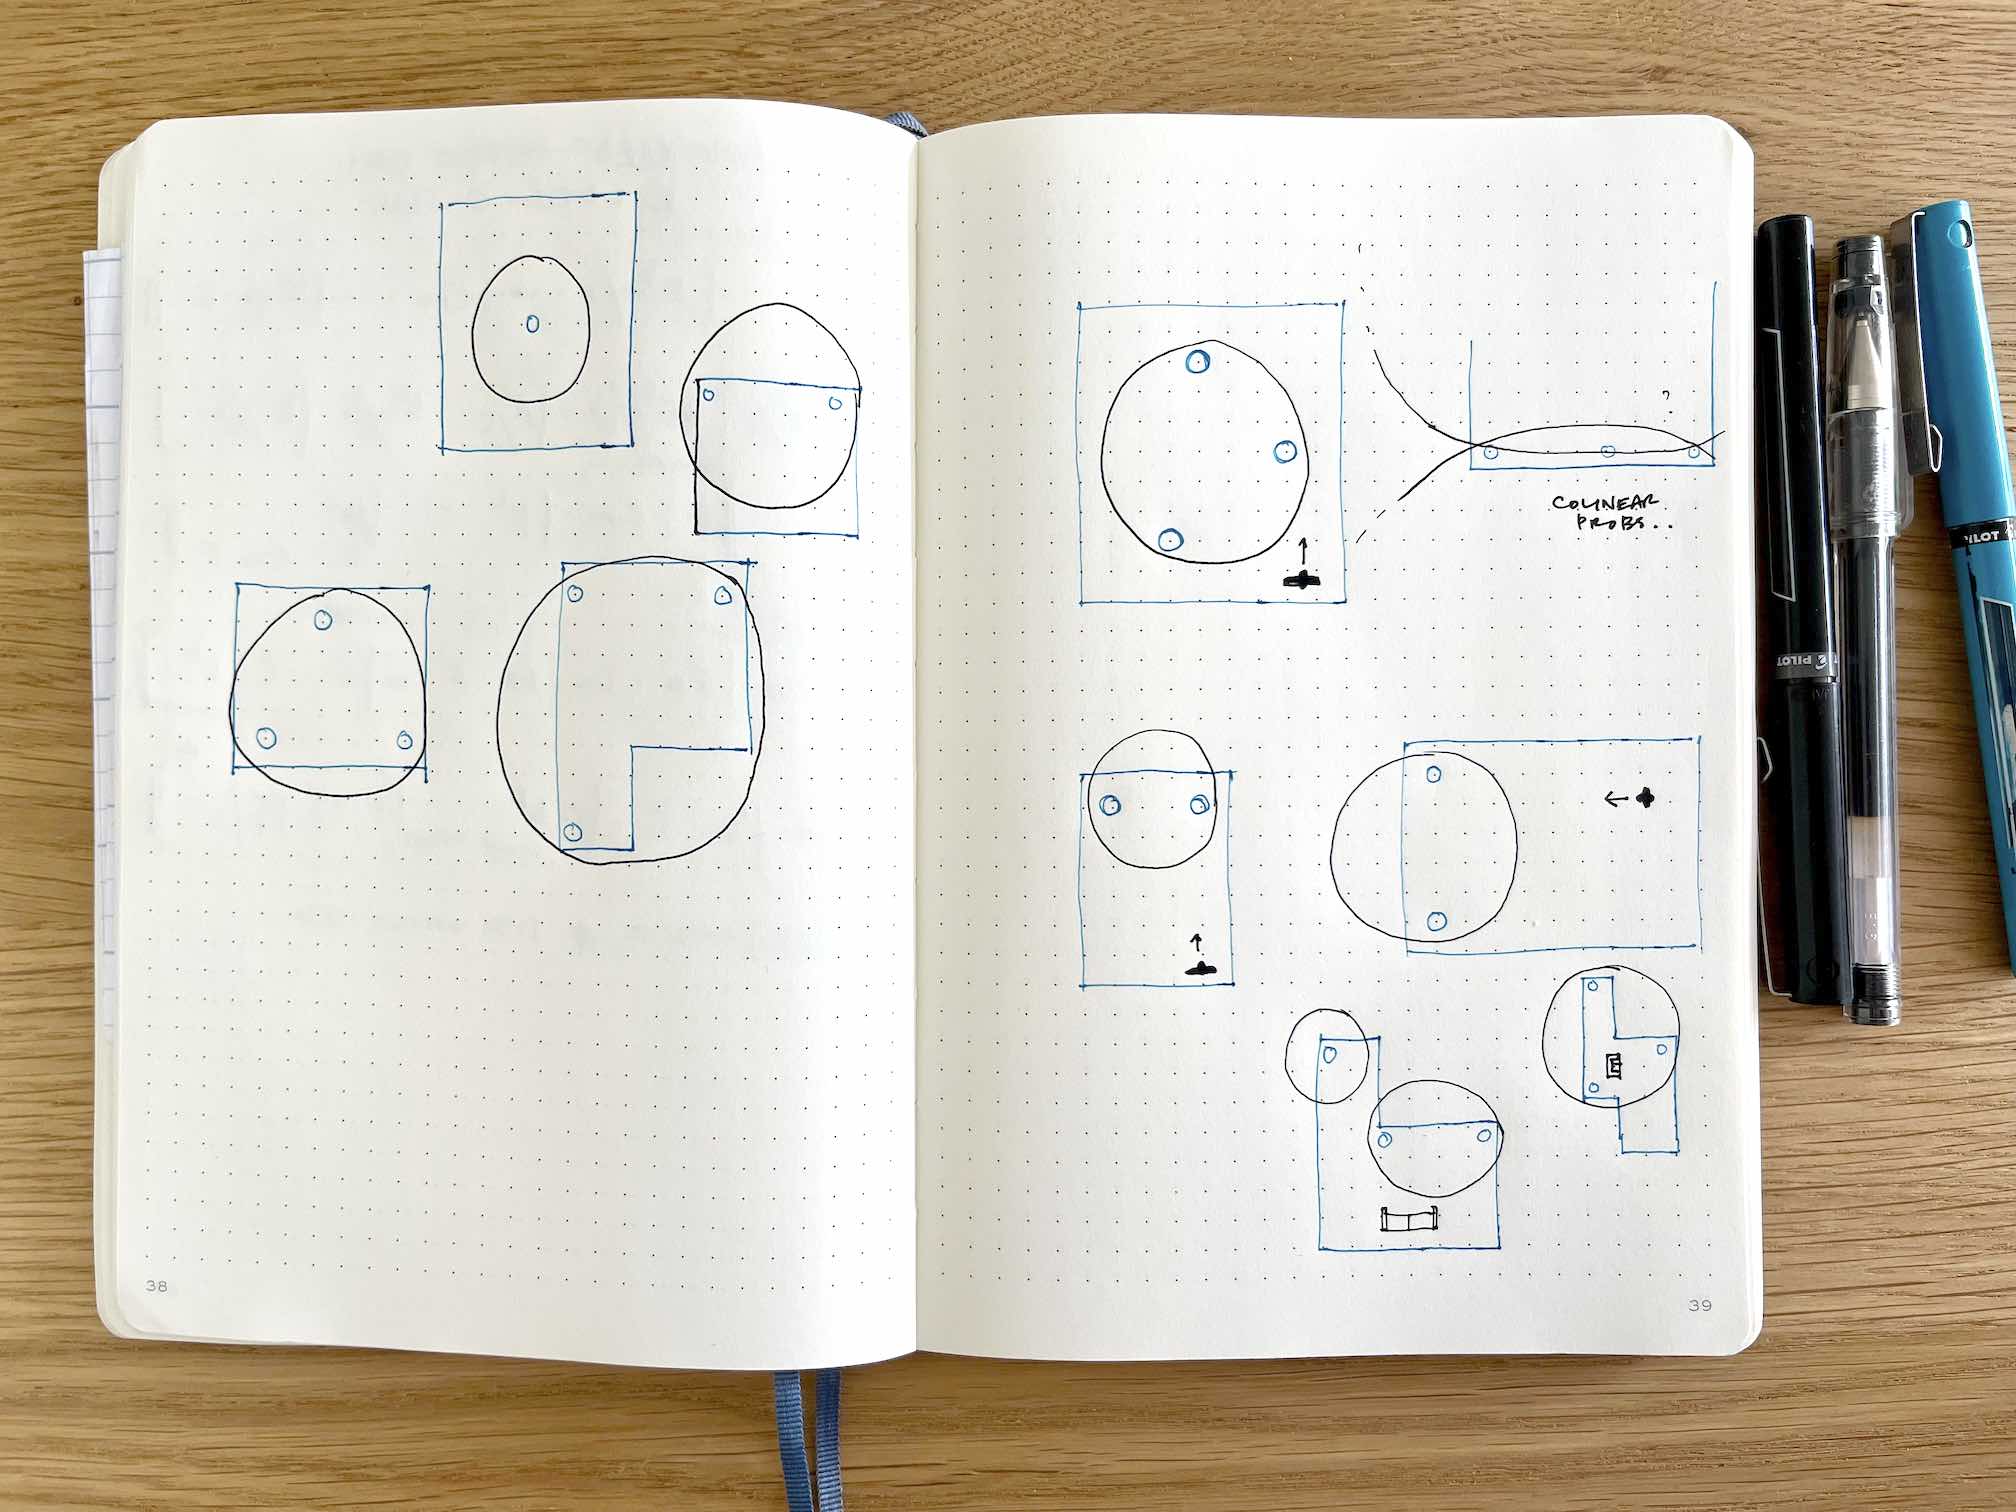 Sketchbook with diagrams of mapping approaches.